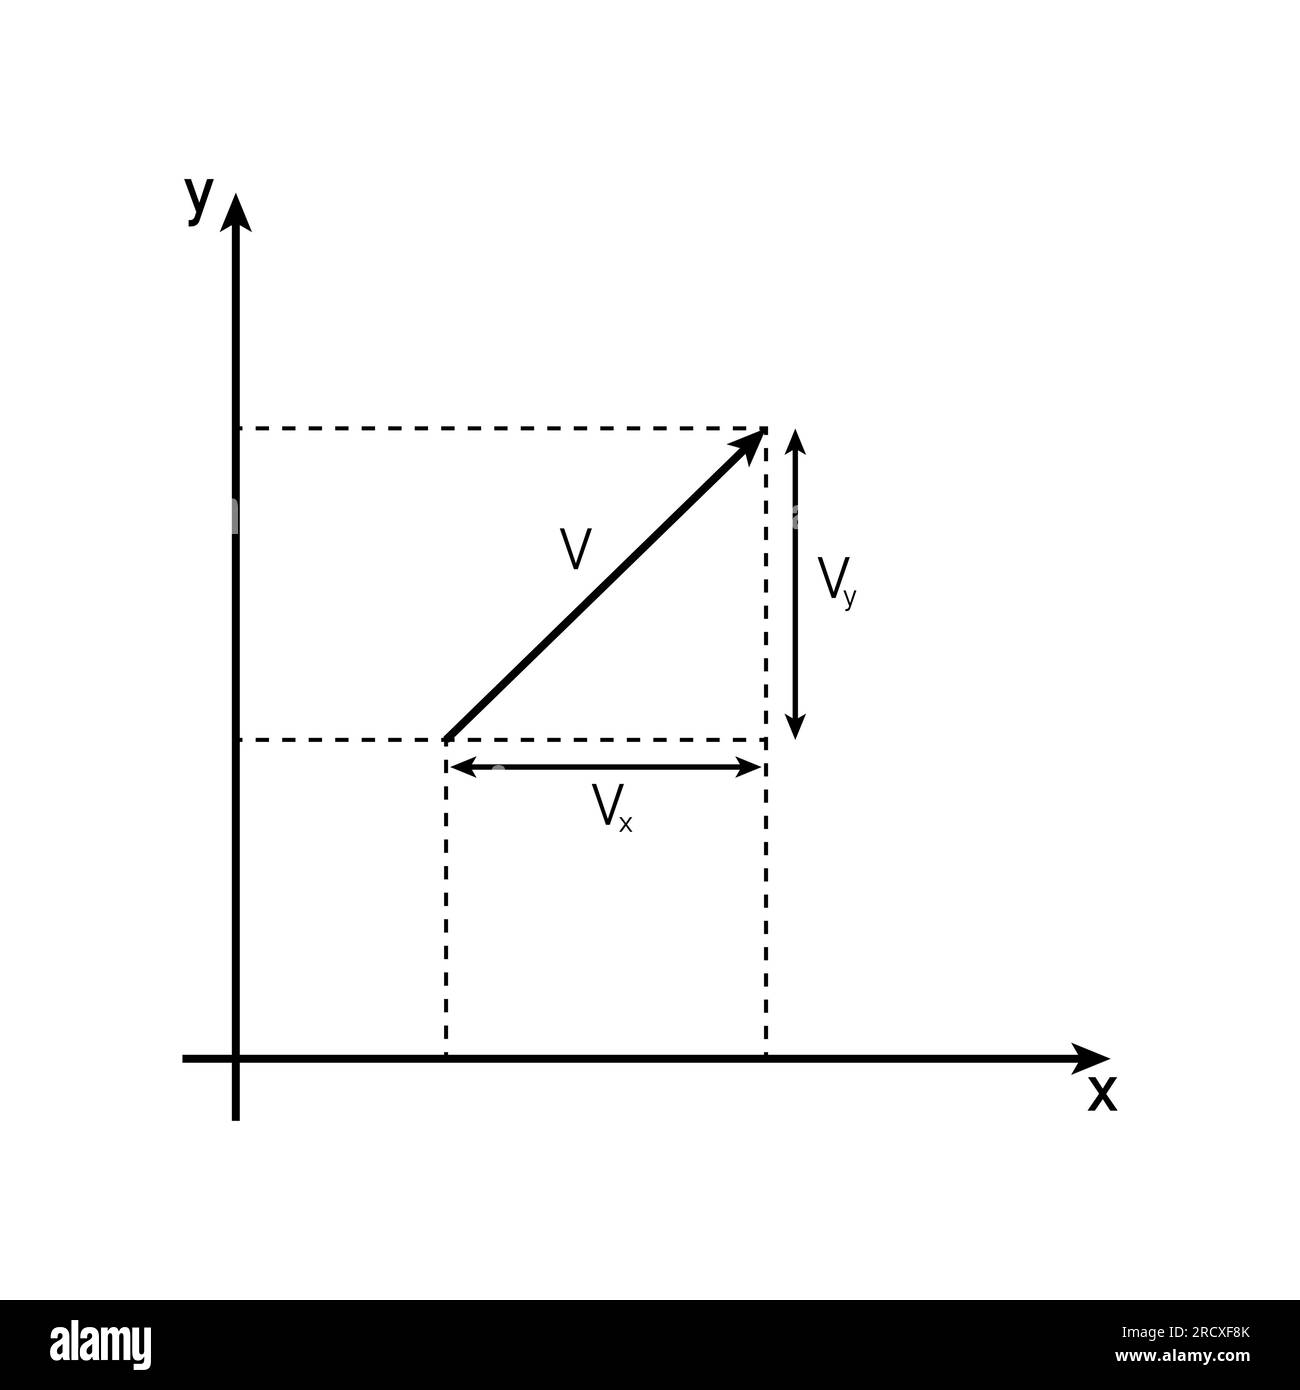 Components of a vector in the coordinate axis. The parts of a vector in two dimensions. Mathematics resources for teachers. Stock Vector